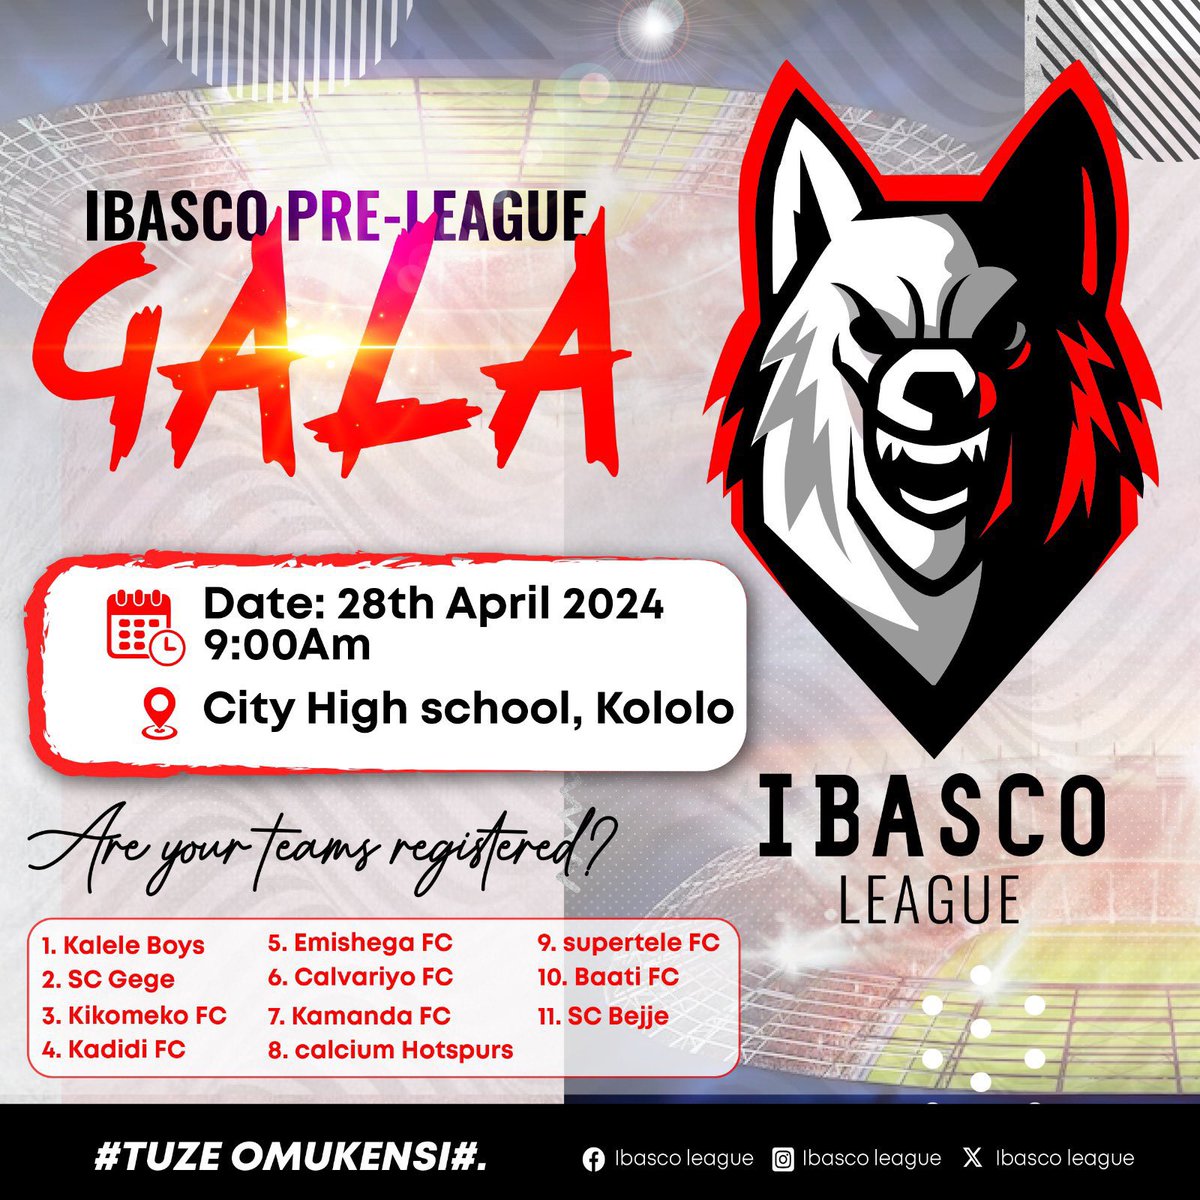 📢 Calling all Ibasco old boys and friends in Kampala! 📢 Don't miss out on the excitement at the Ibasco Pre-League Gala! 🎉 Join us for a day of fun, football, and reconnecting with old friends. Mark your calendars for April 28th at City High School Kololo pitch starting at 8AM